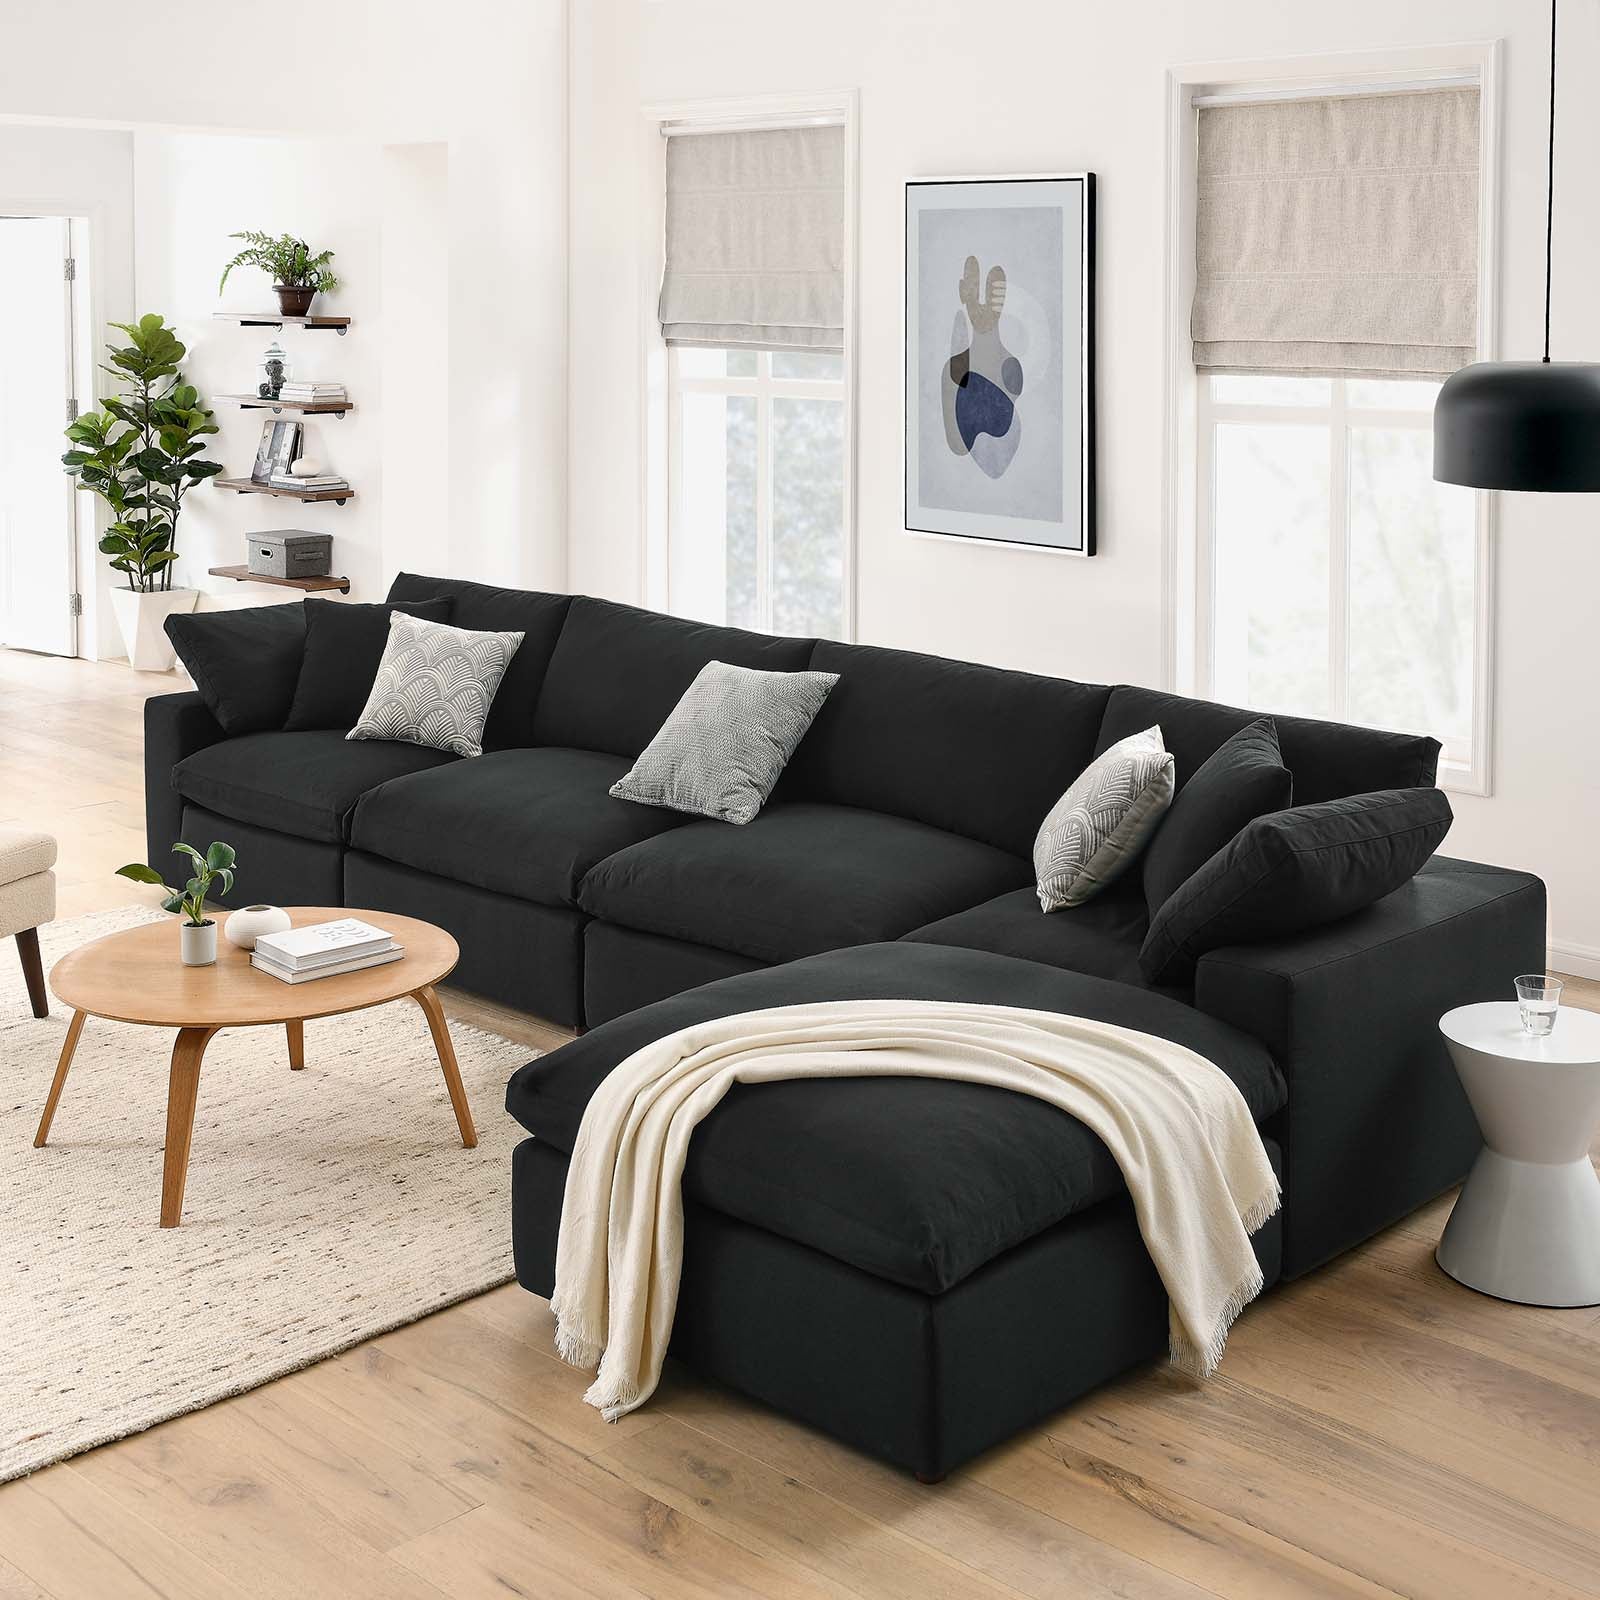 Haven Deep Seat Sectional Sofa With Ottoman, 4 Seater